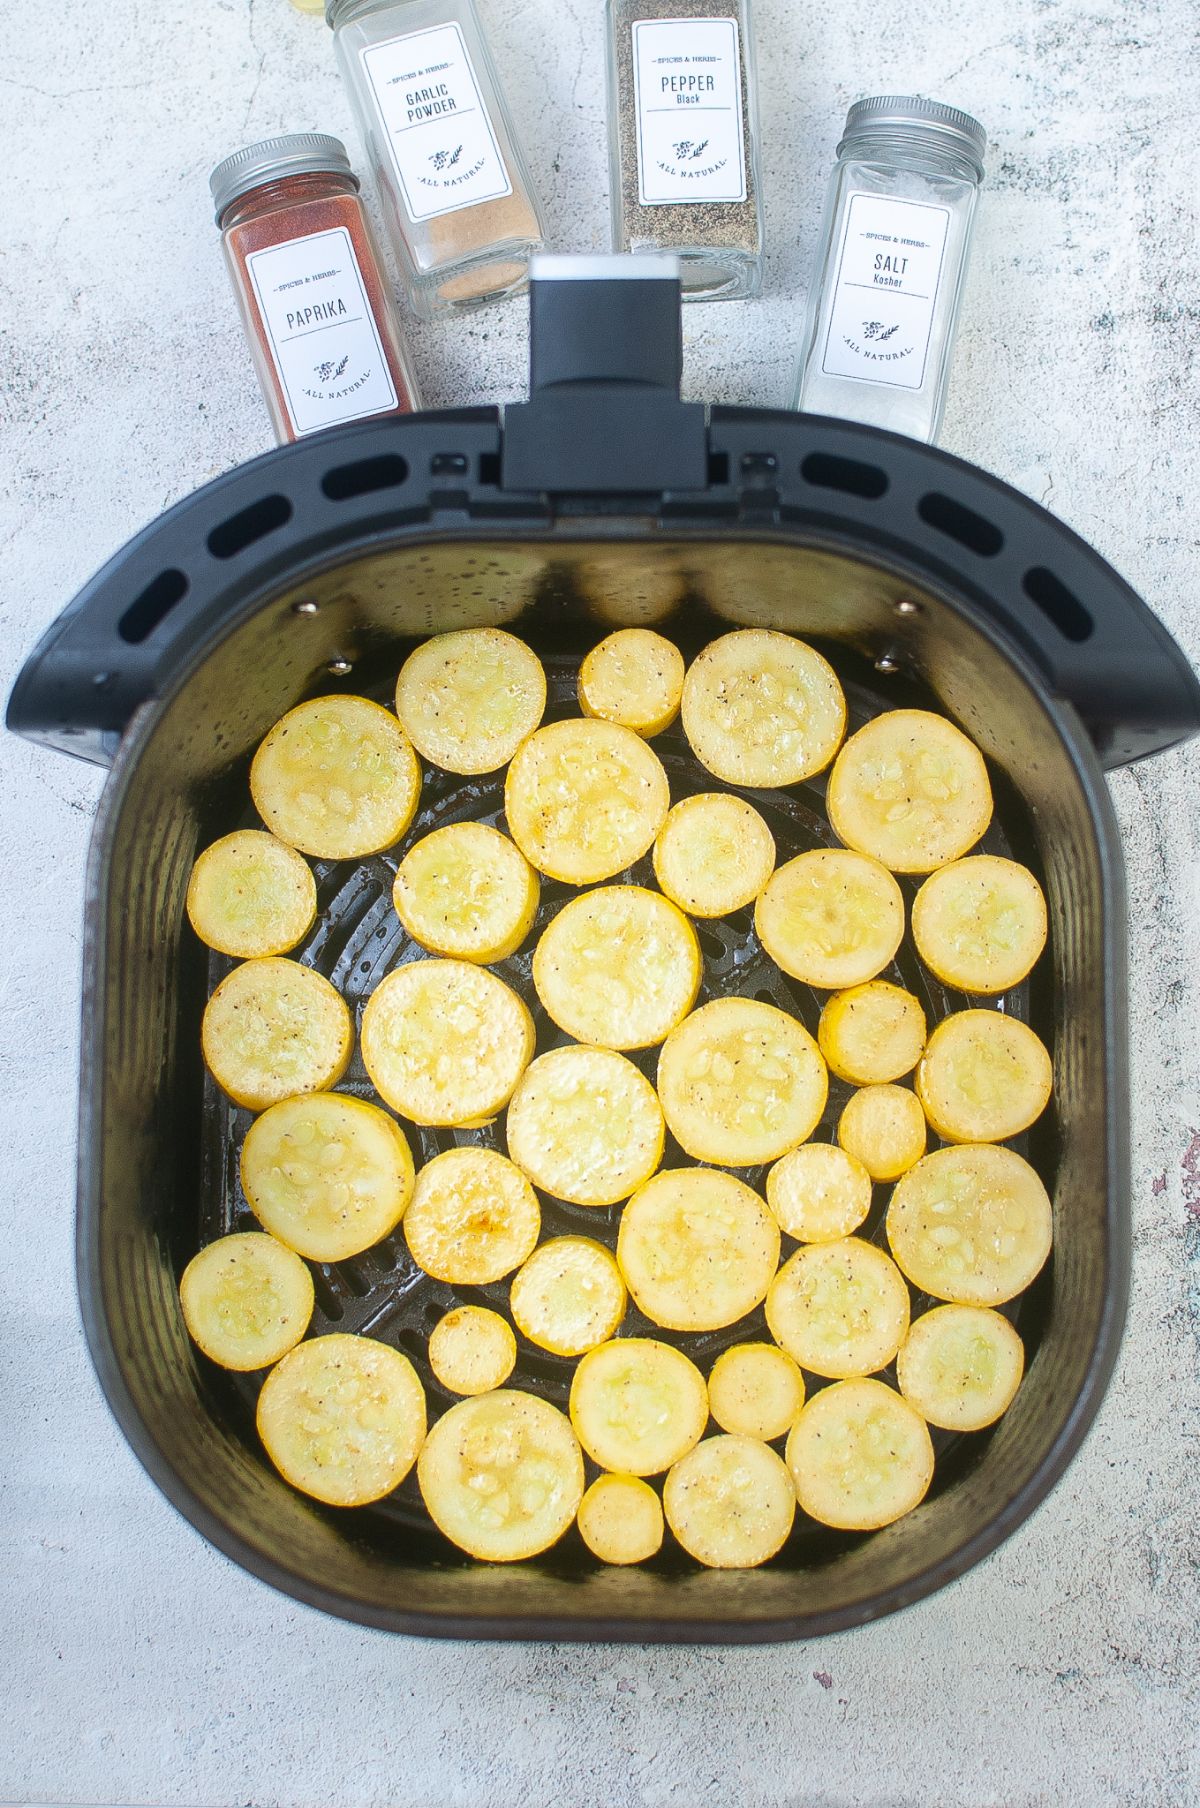 Slices of squash in the air fryer basket.